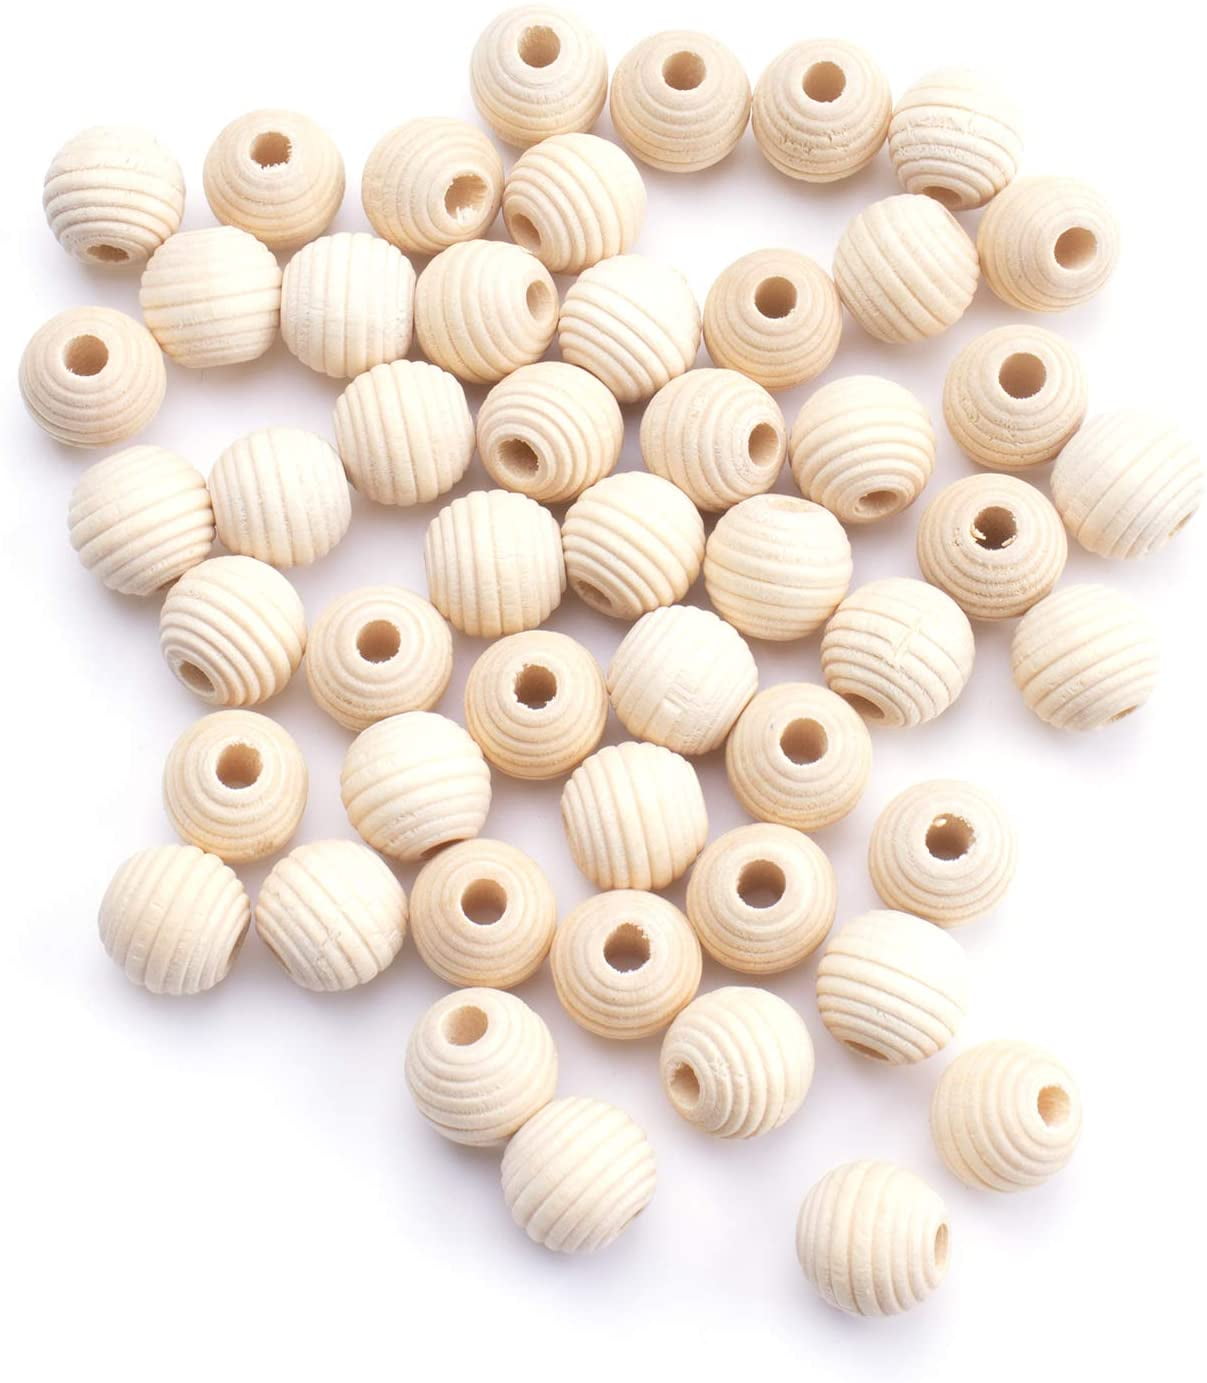 100PCS Wooden Beads Natural Wood Space Organic Unfinished Necklaces Making Craft 